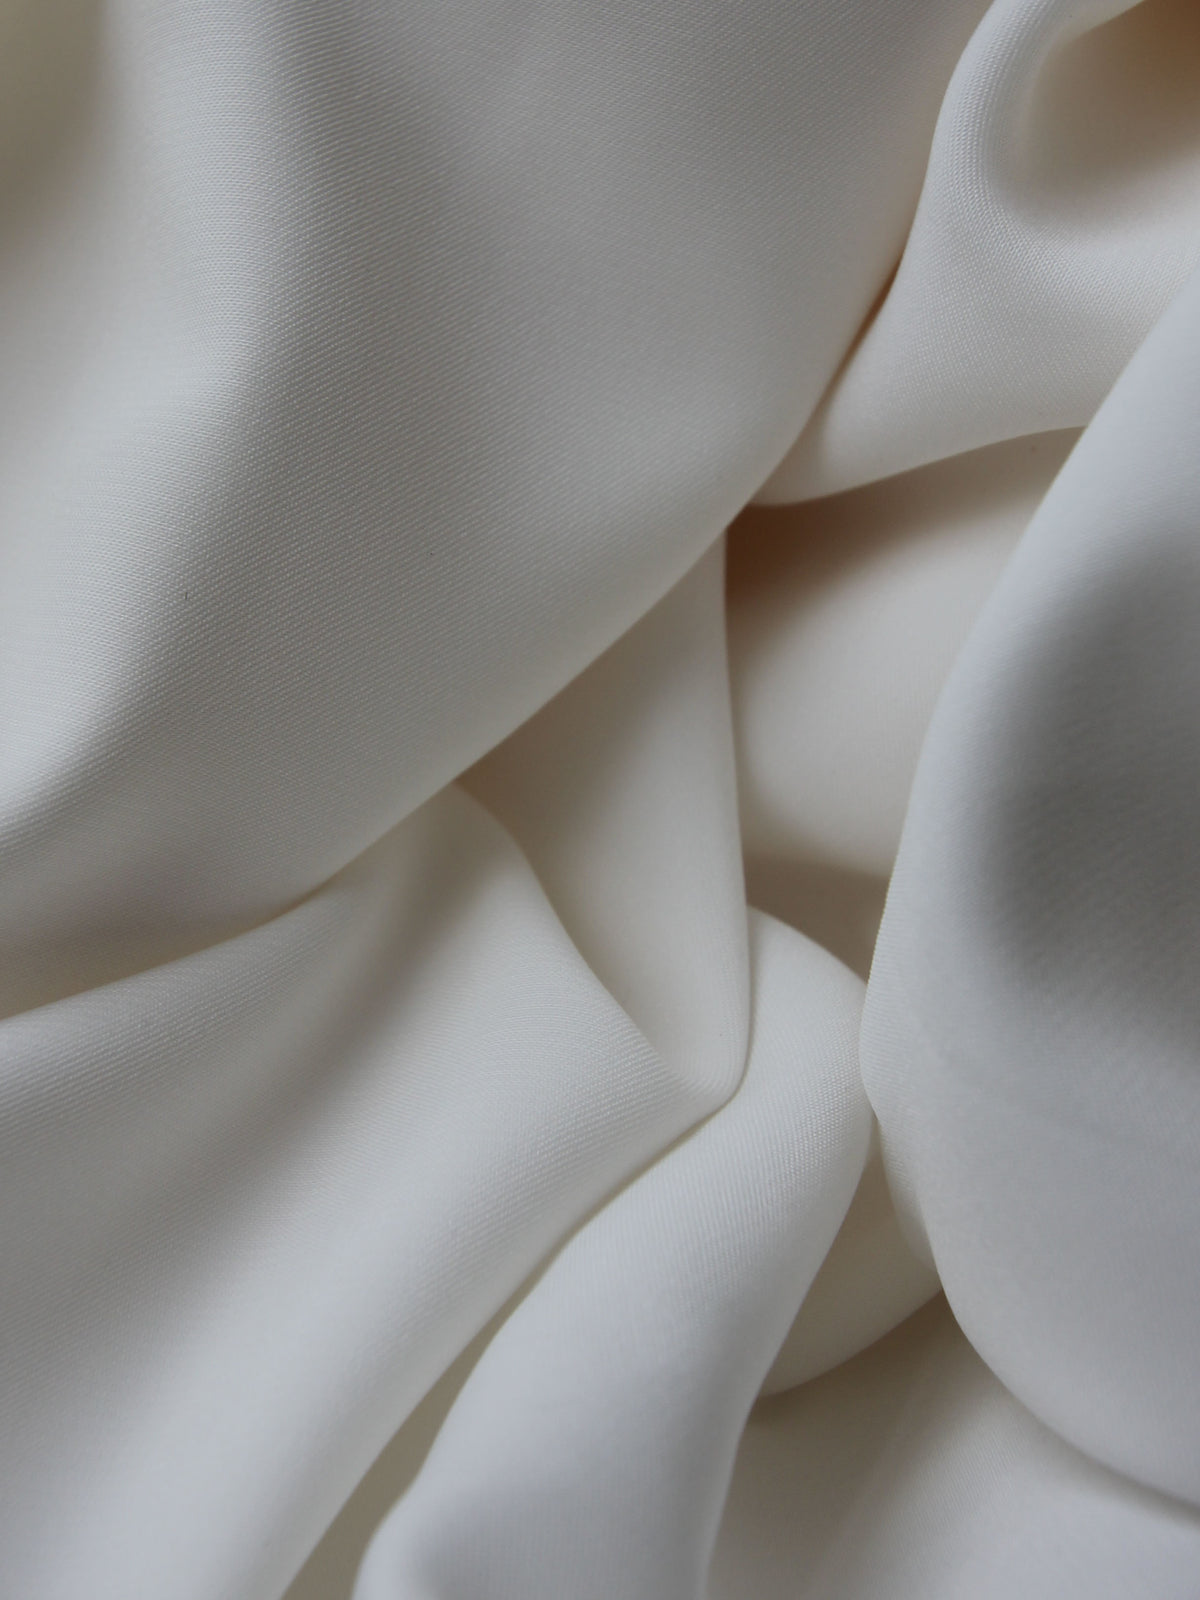 Polyester Lining Fabric - Kiss